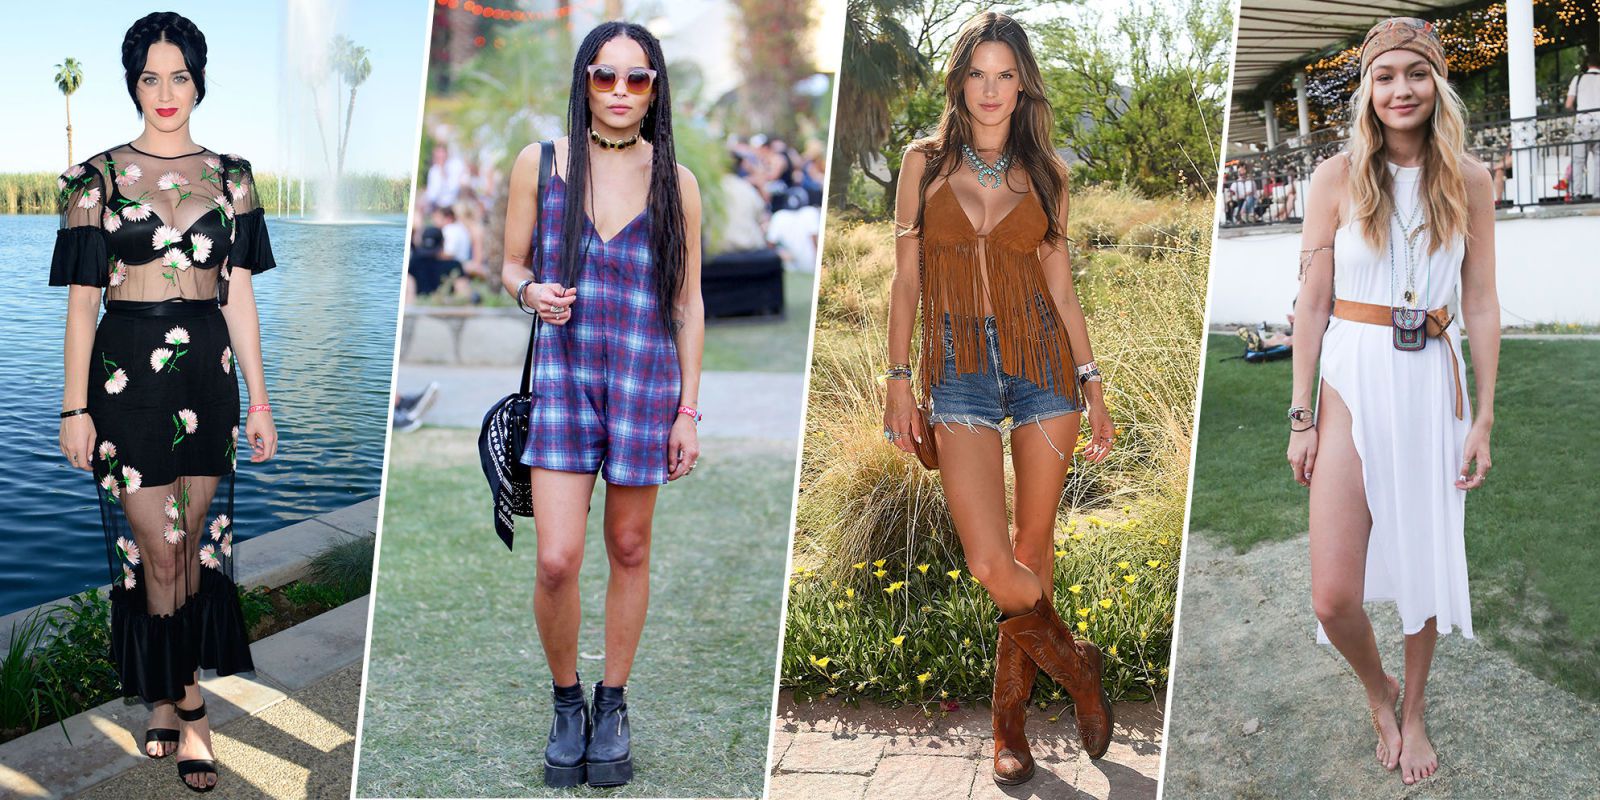 Summer 2018 Music Festival Fashion - Festival Outfit Ideas Inspired